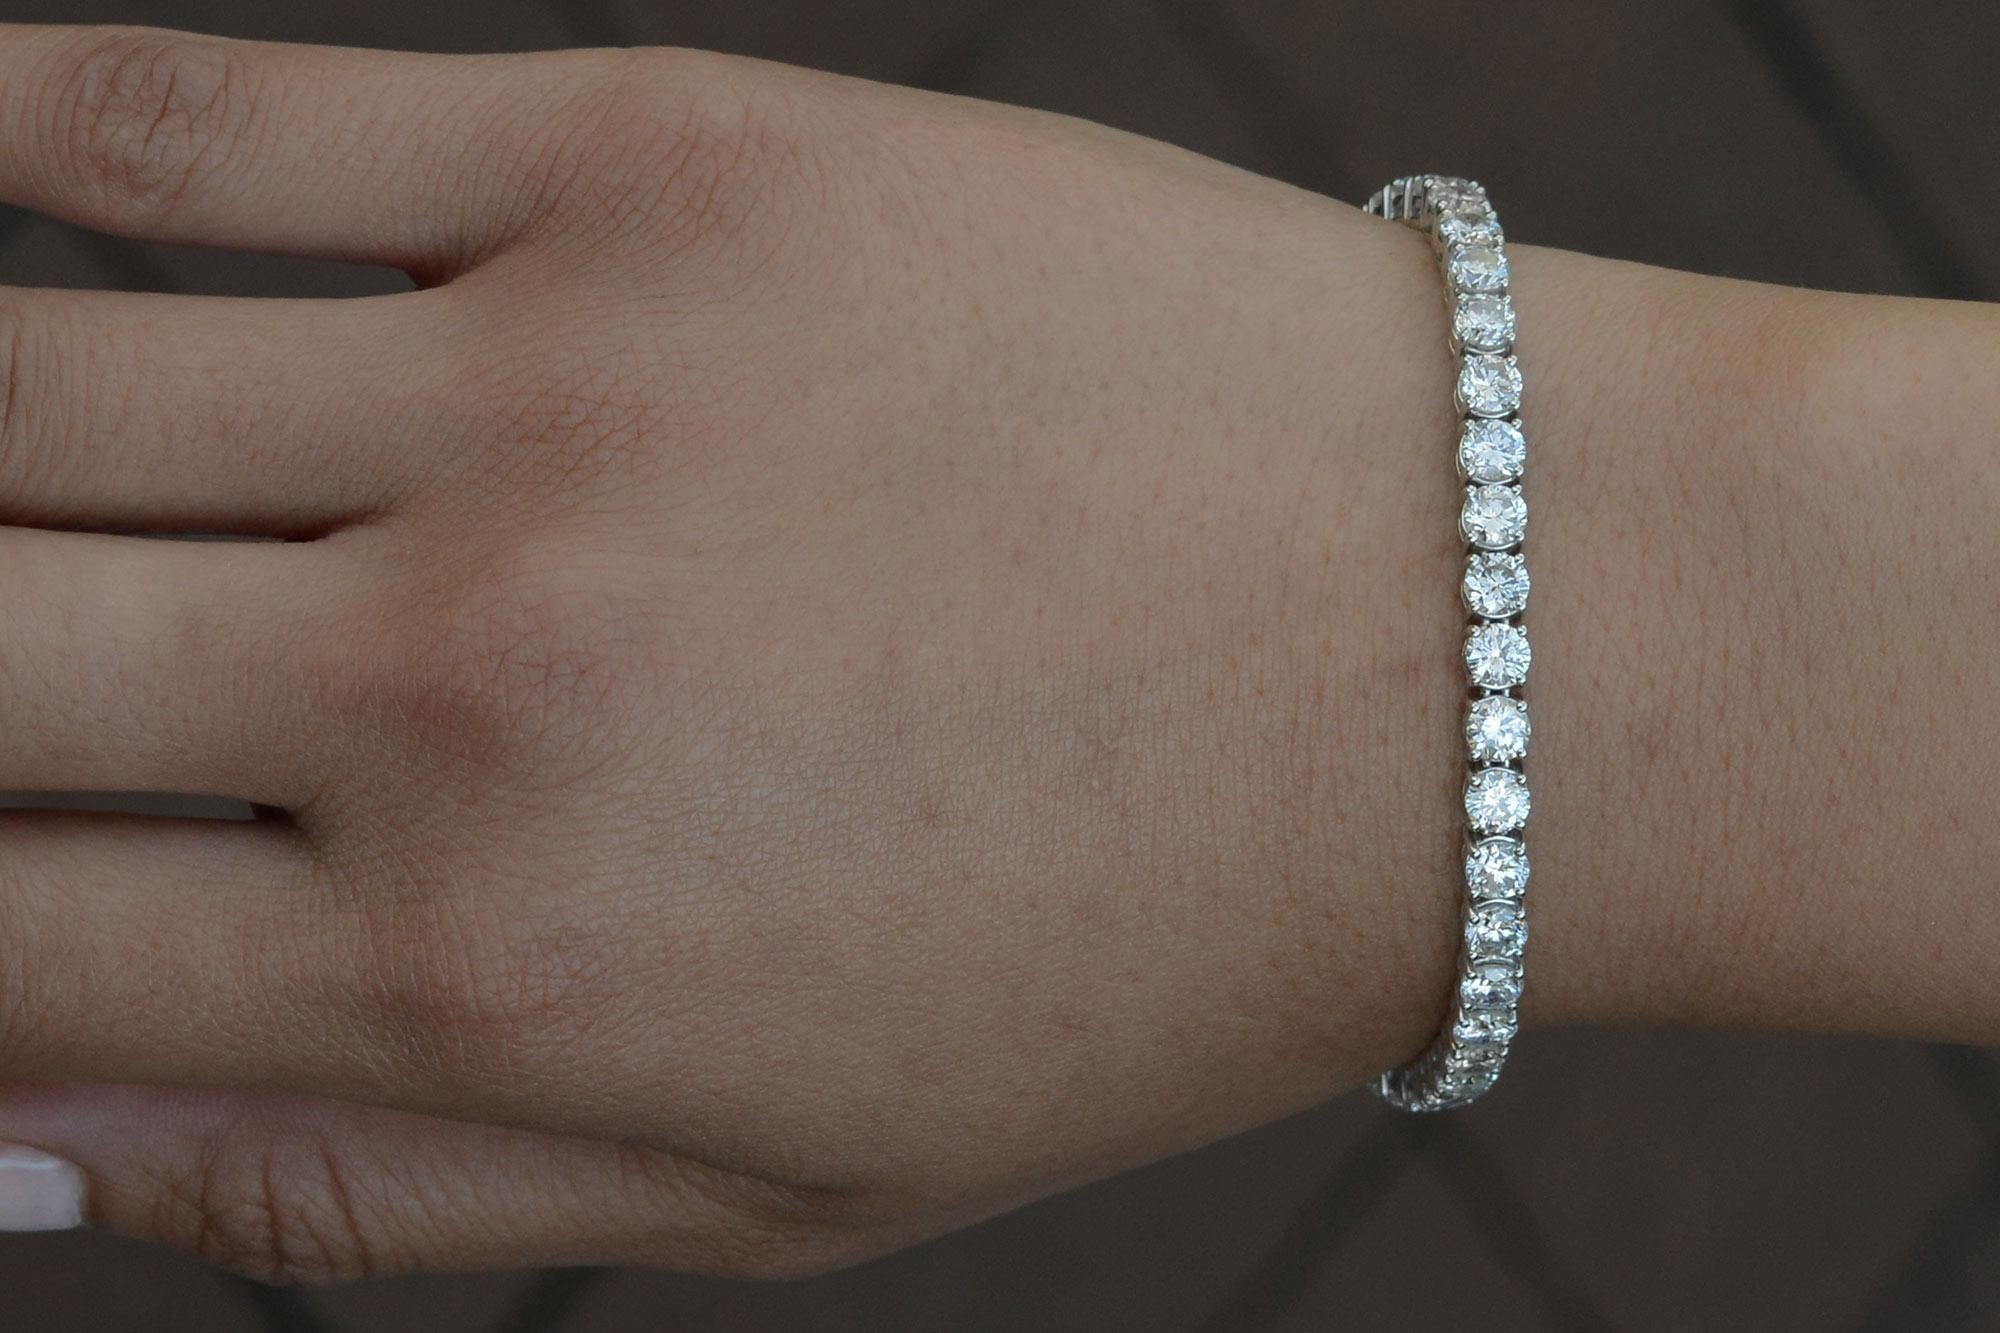 Experience brilliant elegance with this exquisite diamond tennis bracelet. Featuring 14.23 carats total of shimmering, near colorless diamonds (H-I, SI Clarity) set in 14-karat white gold, this straight-line bracelet is the perfect choice for any